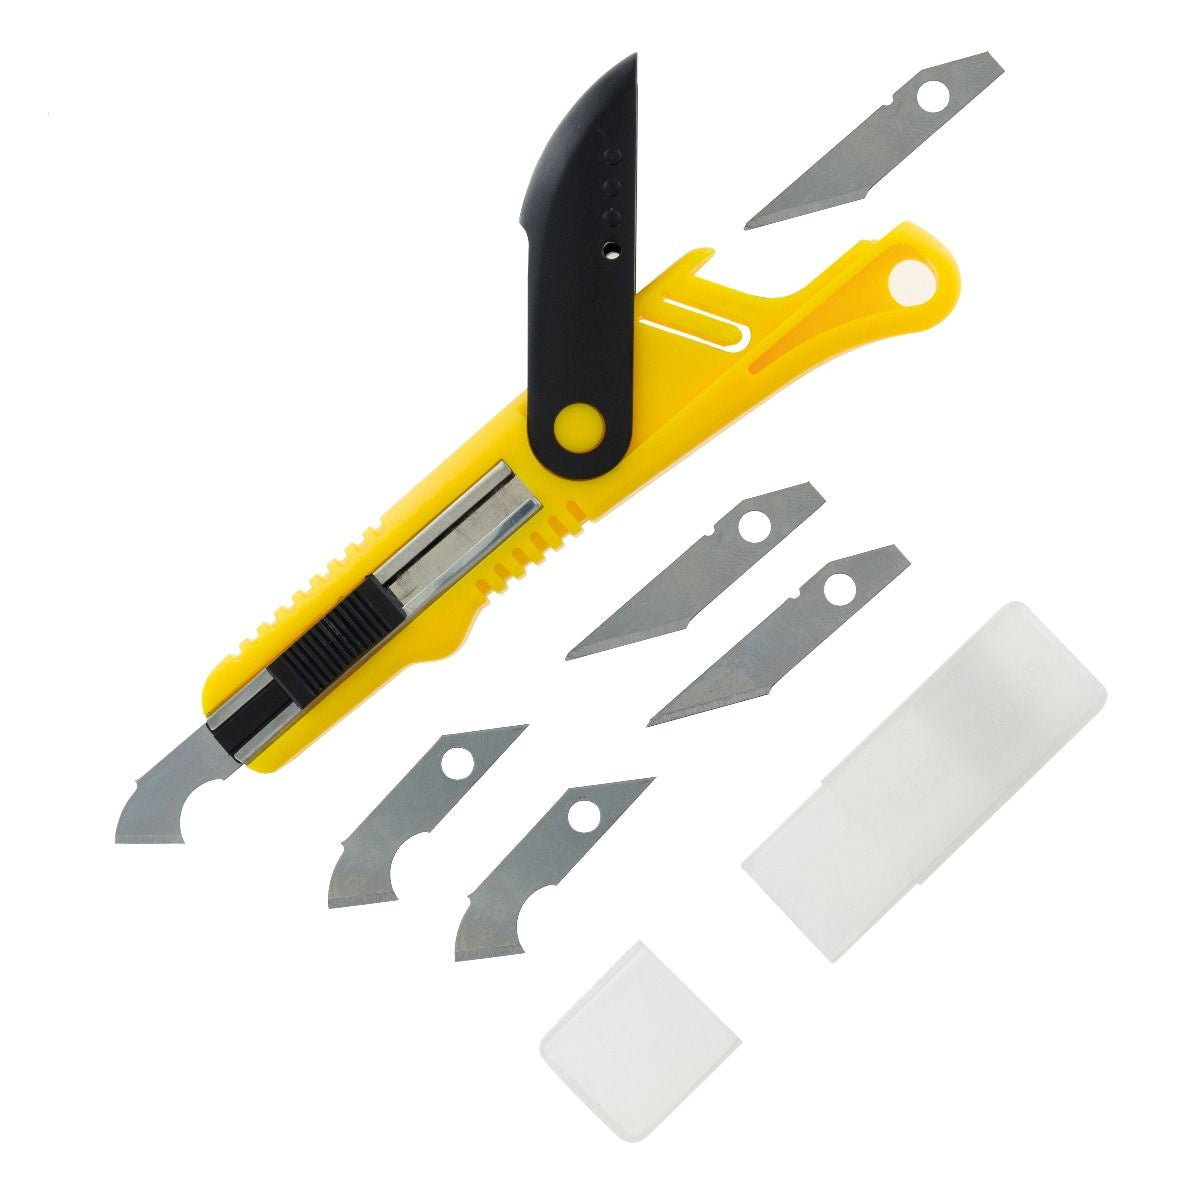 Vallejo Hobby Tools - Plastic Cutter Scriber Tool &amp; 5 Spare Blades